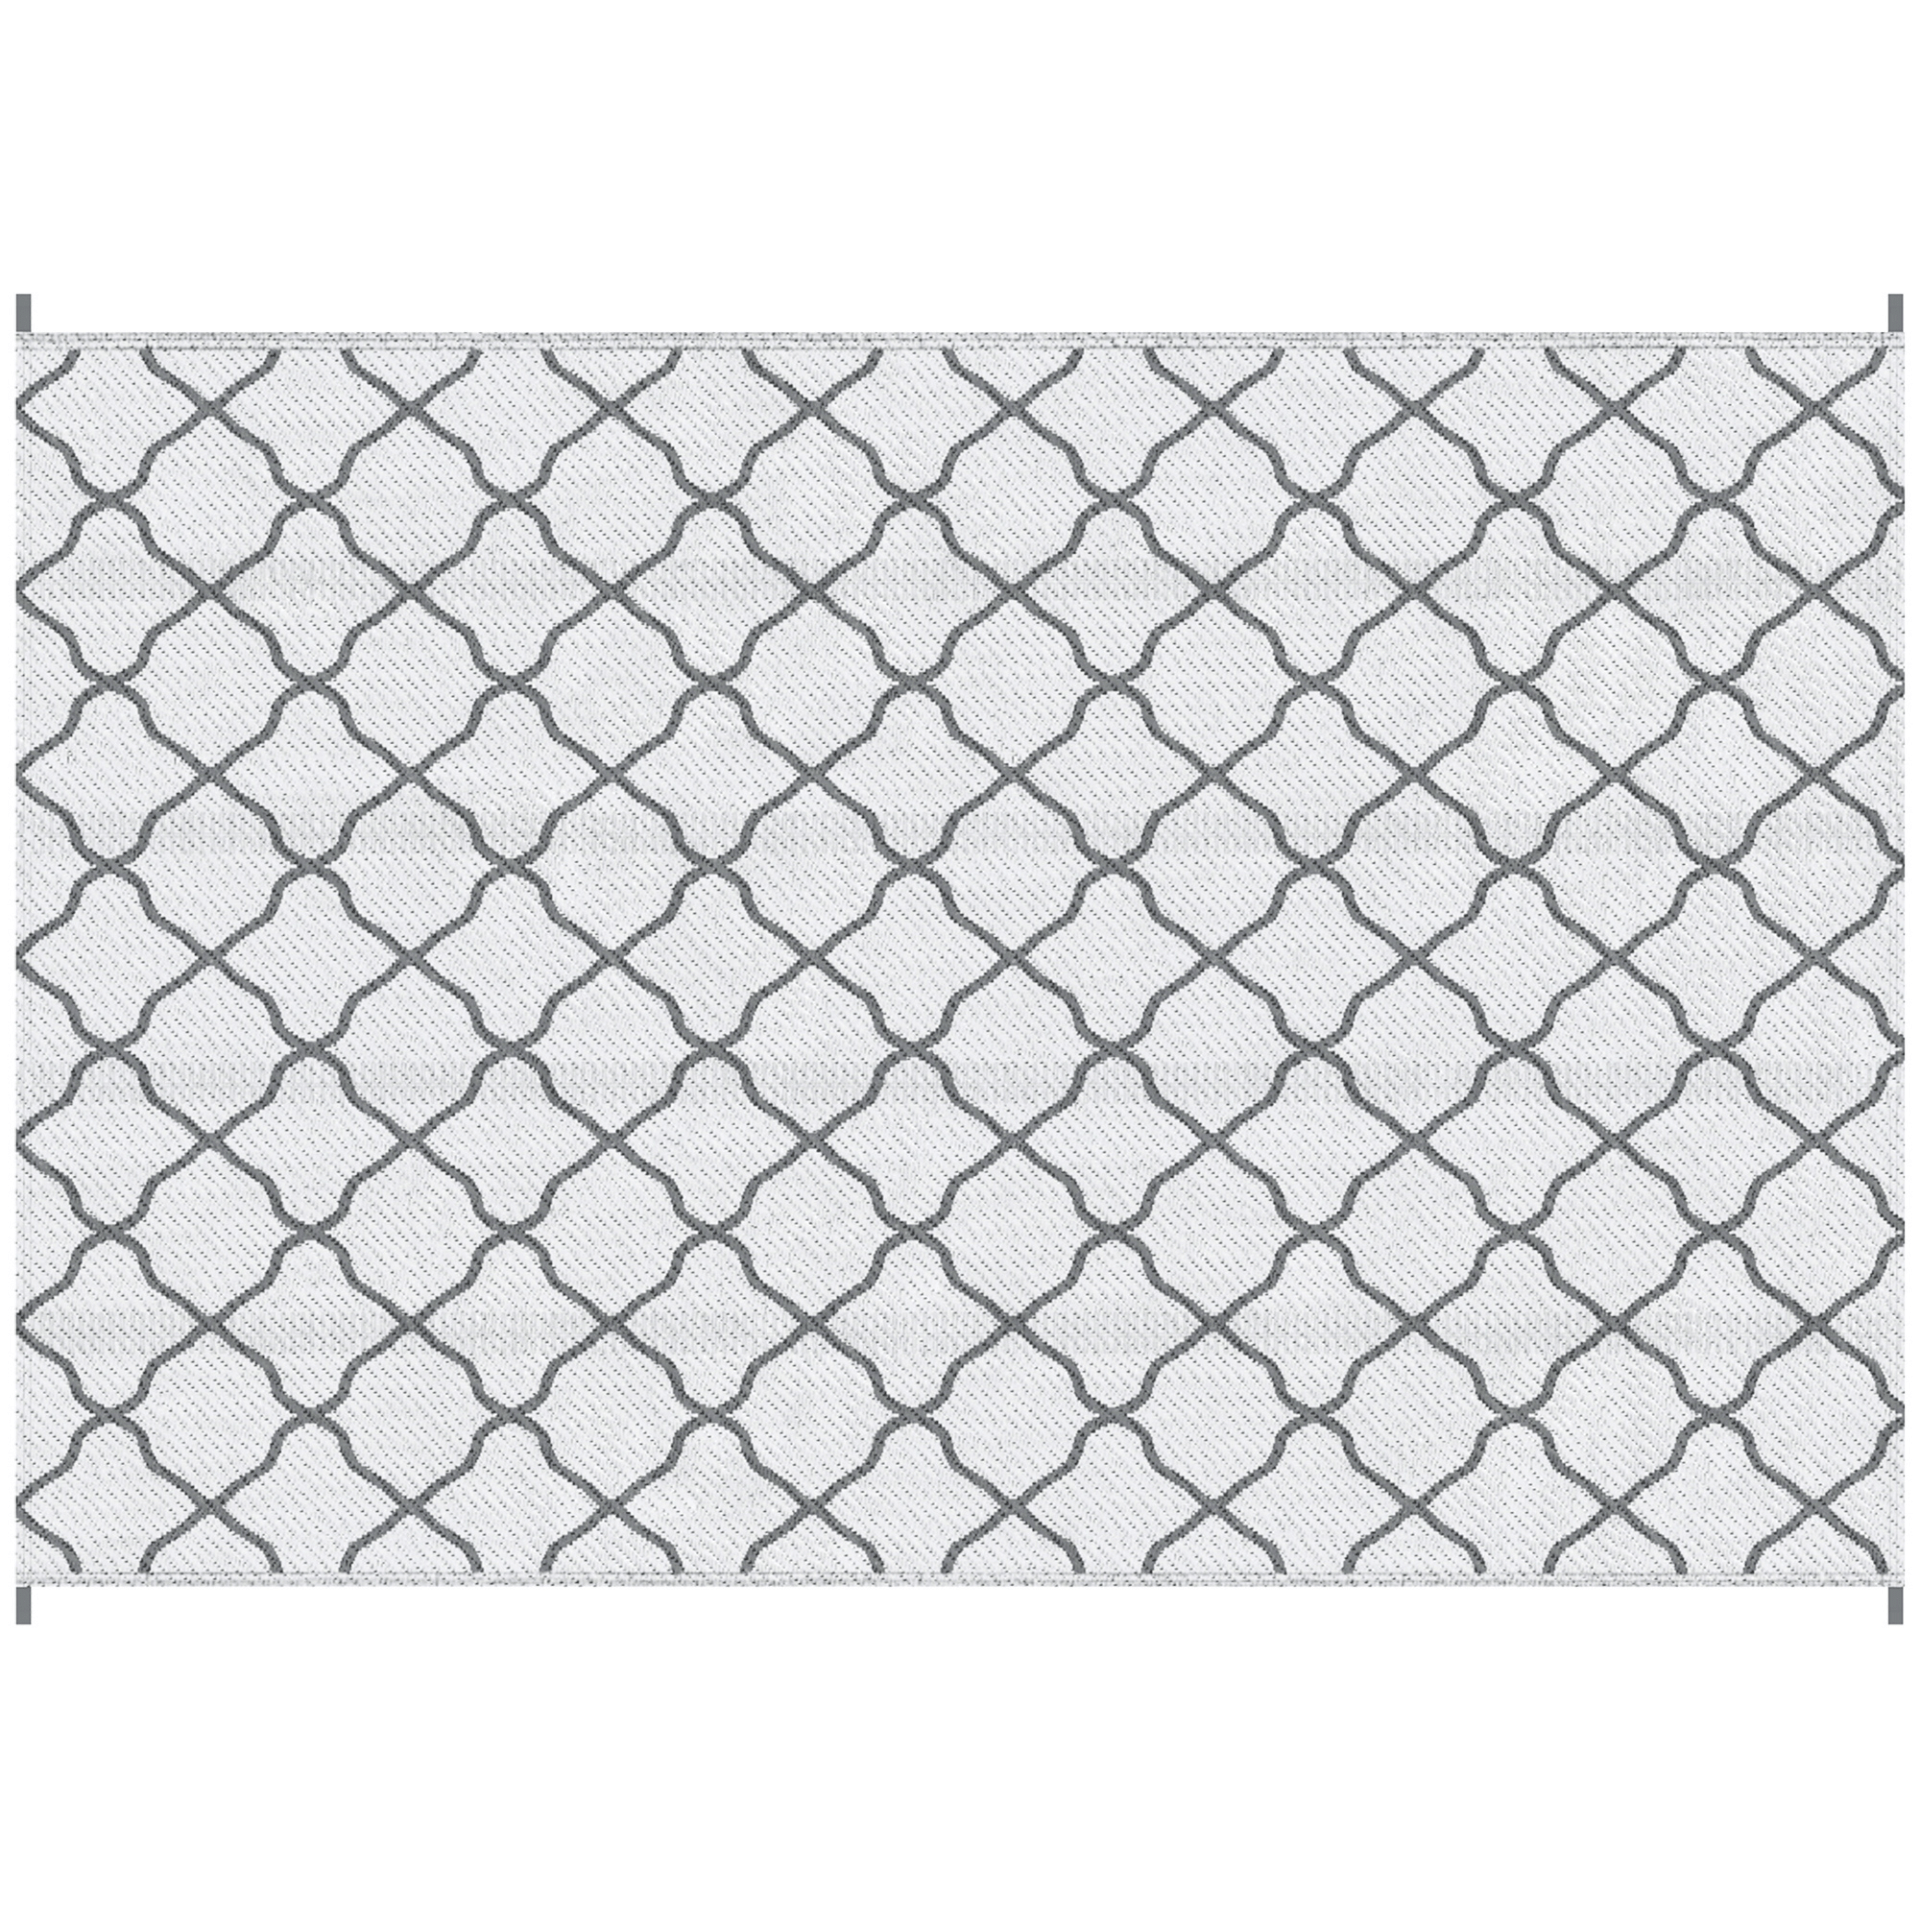 Outsunny Reversible Outdoor Rug - Waterproof Plastic Straw Mat with Carry Bag and Ground Stakes - Grey & White - 182 x 274 cm Camping Floor Mat Cosy Camping Co.   